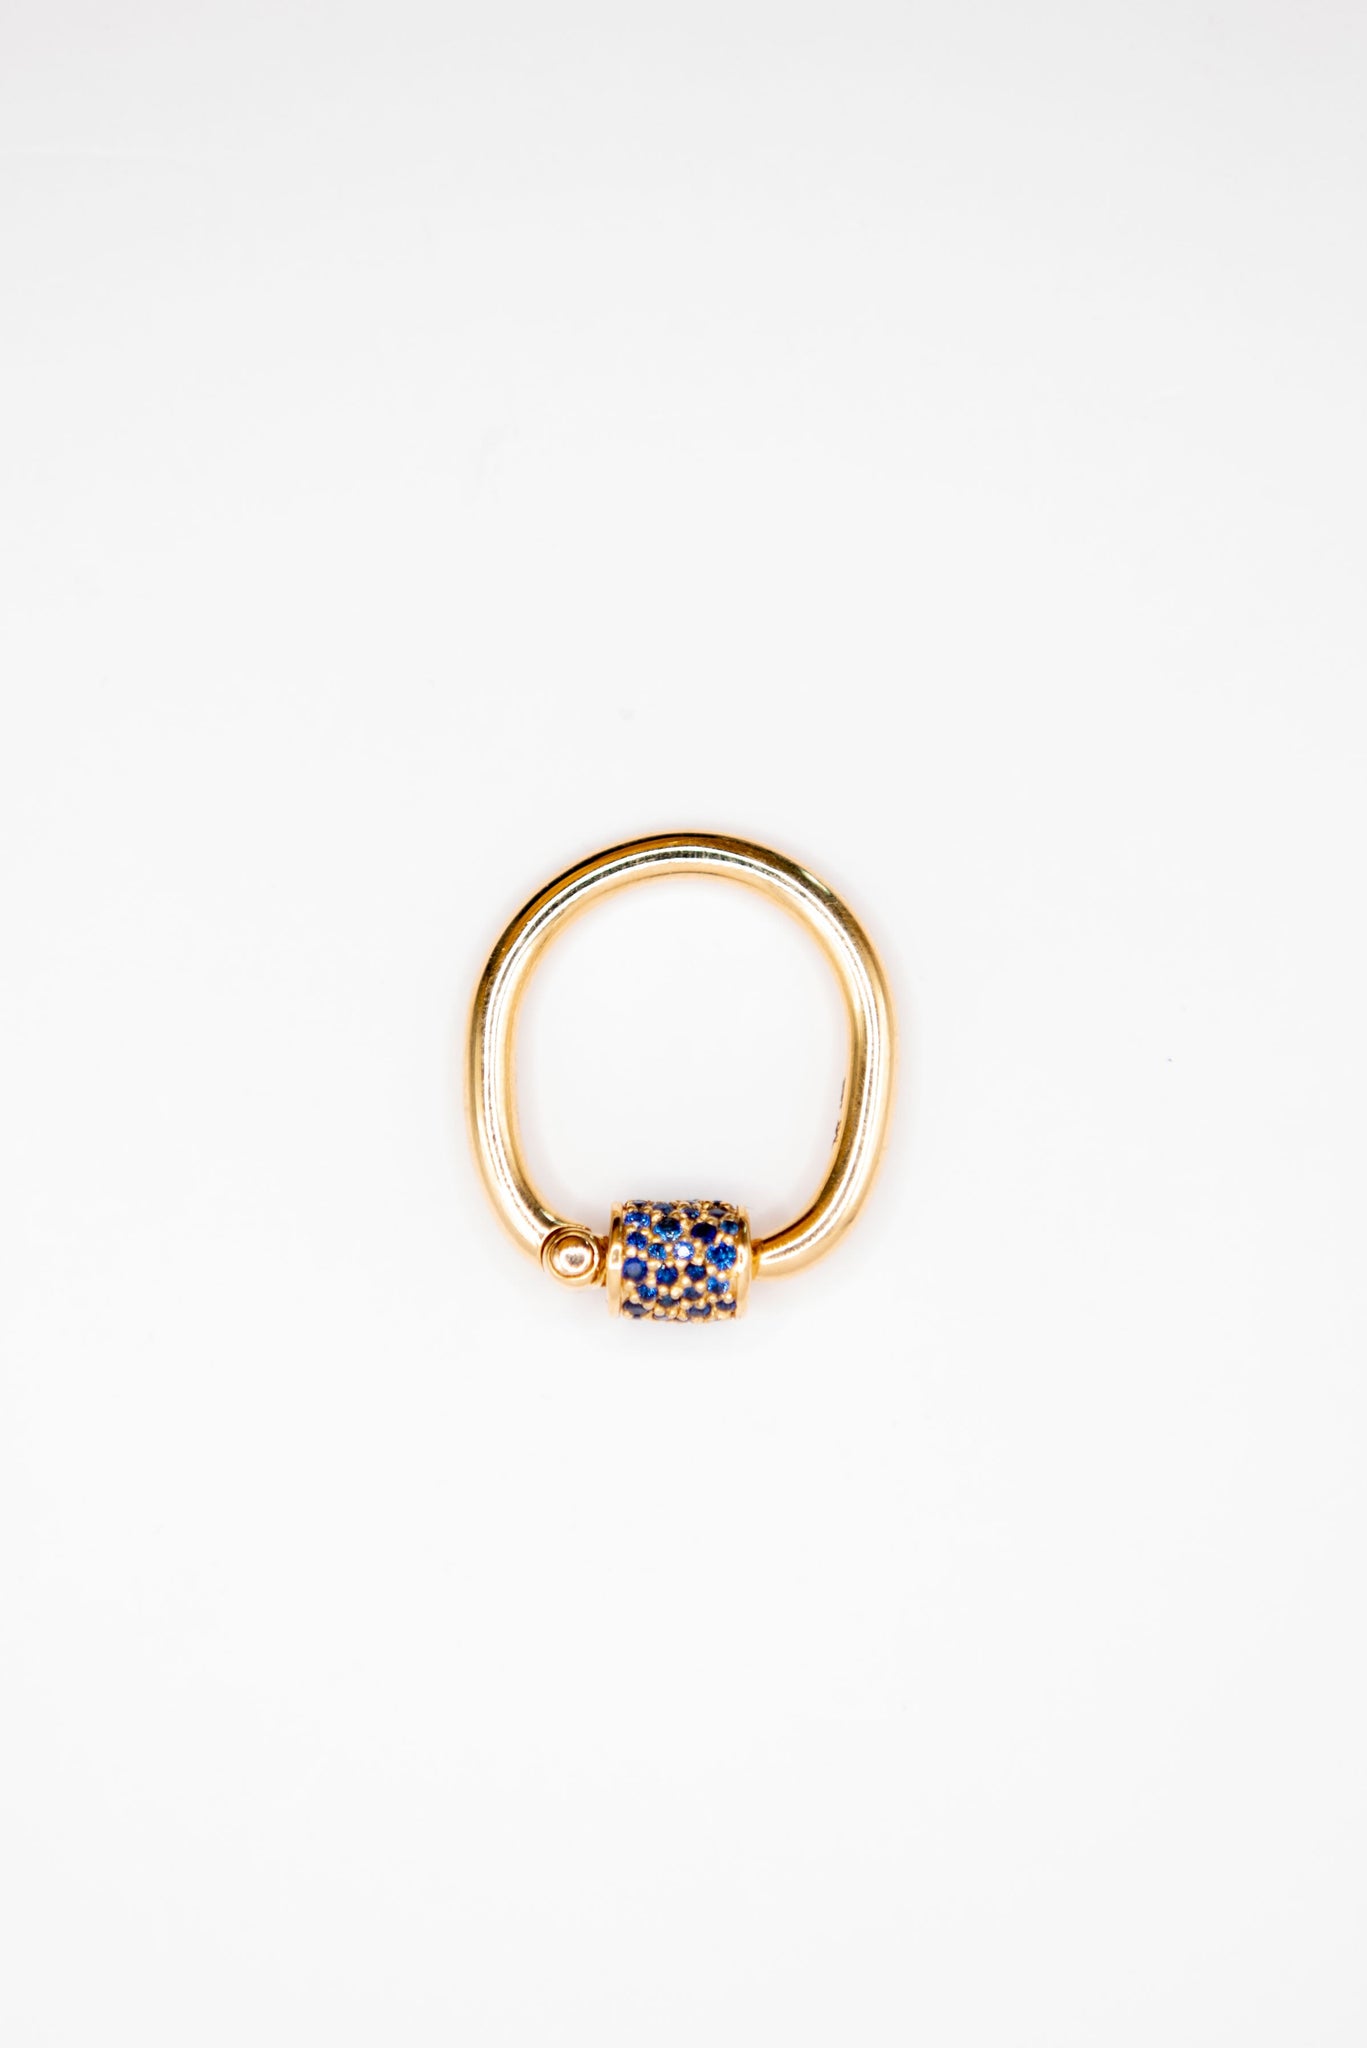 MARLA AARON - The Stoned Trundle Lock Ring, Sapphire Blue